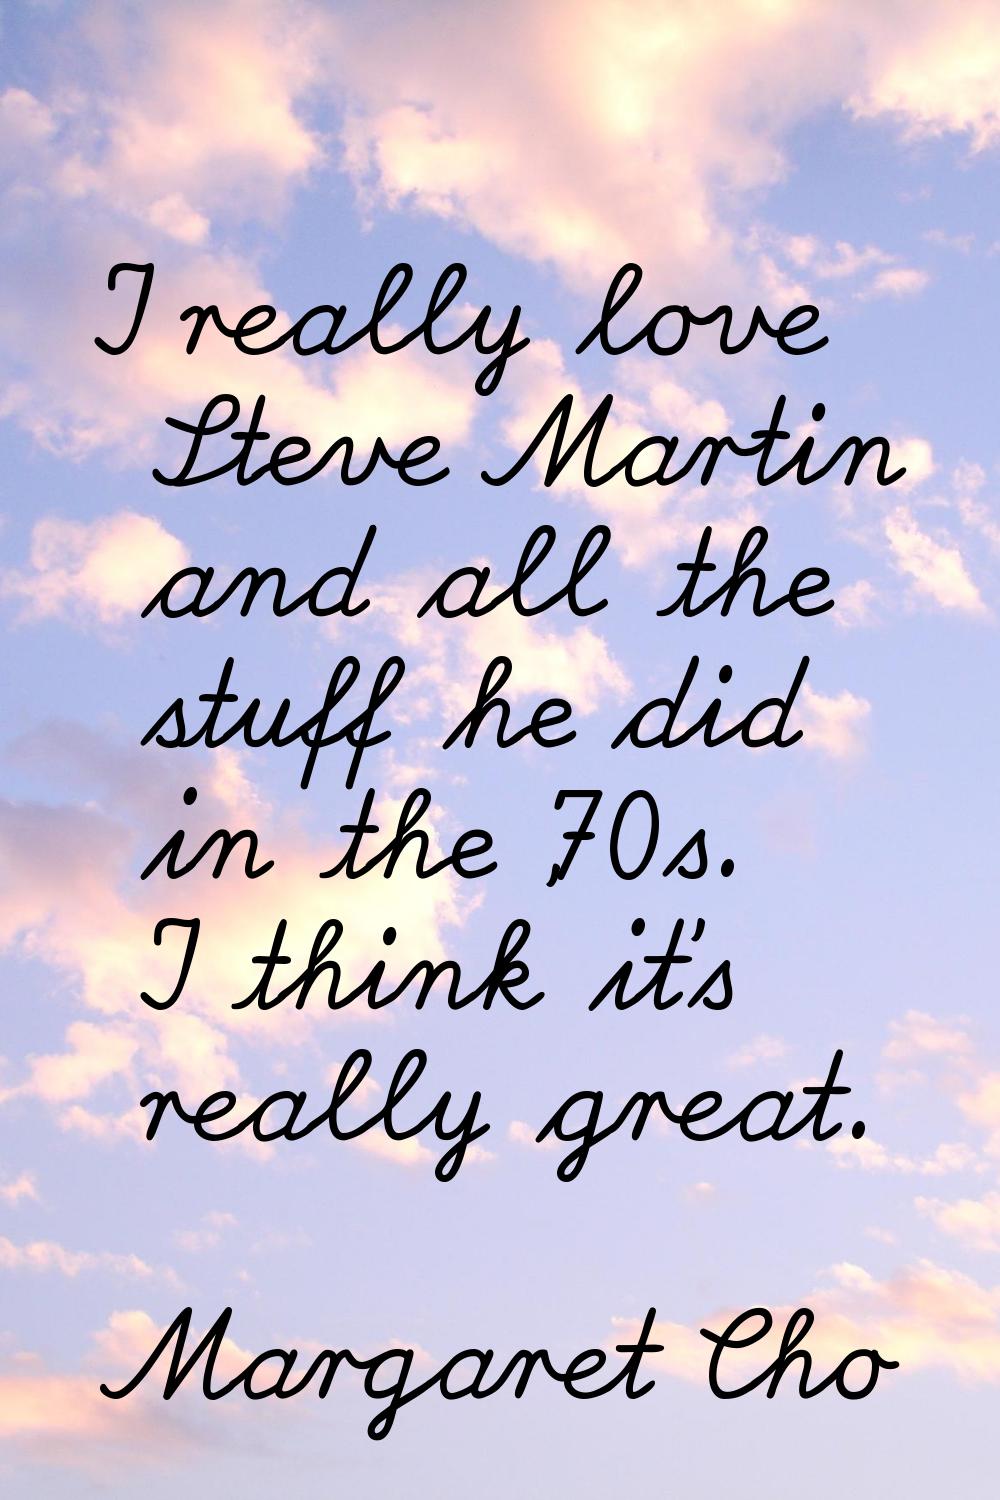 I really love Steve Martin and all the stuff he did in the '70s. I think it's really great.